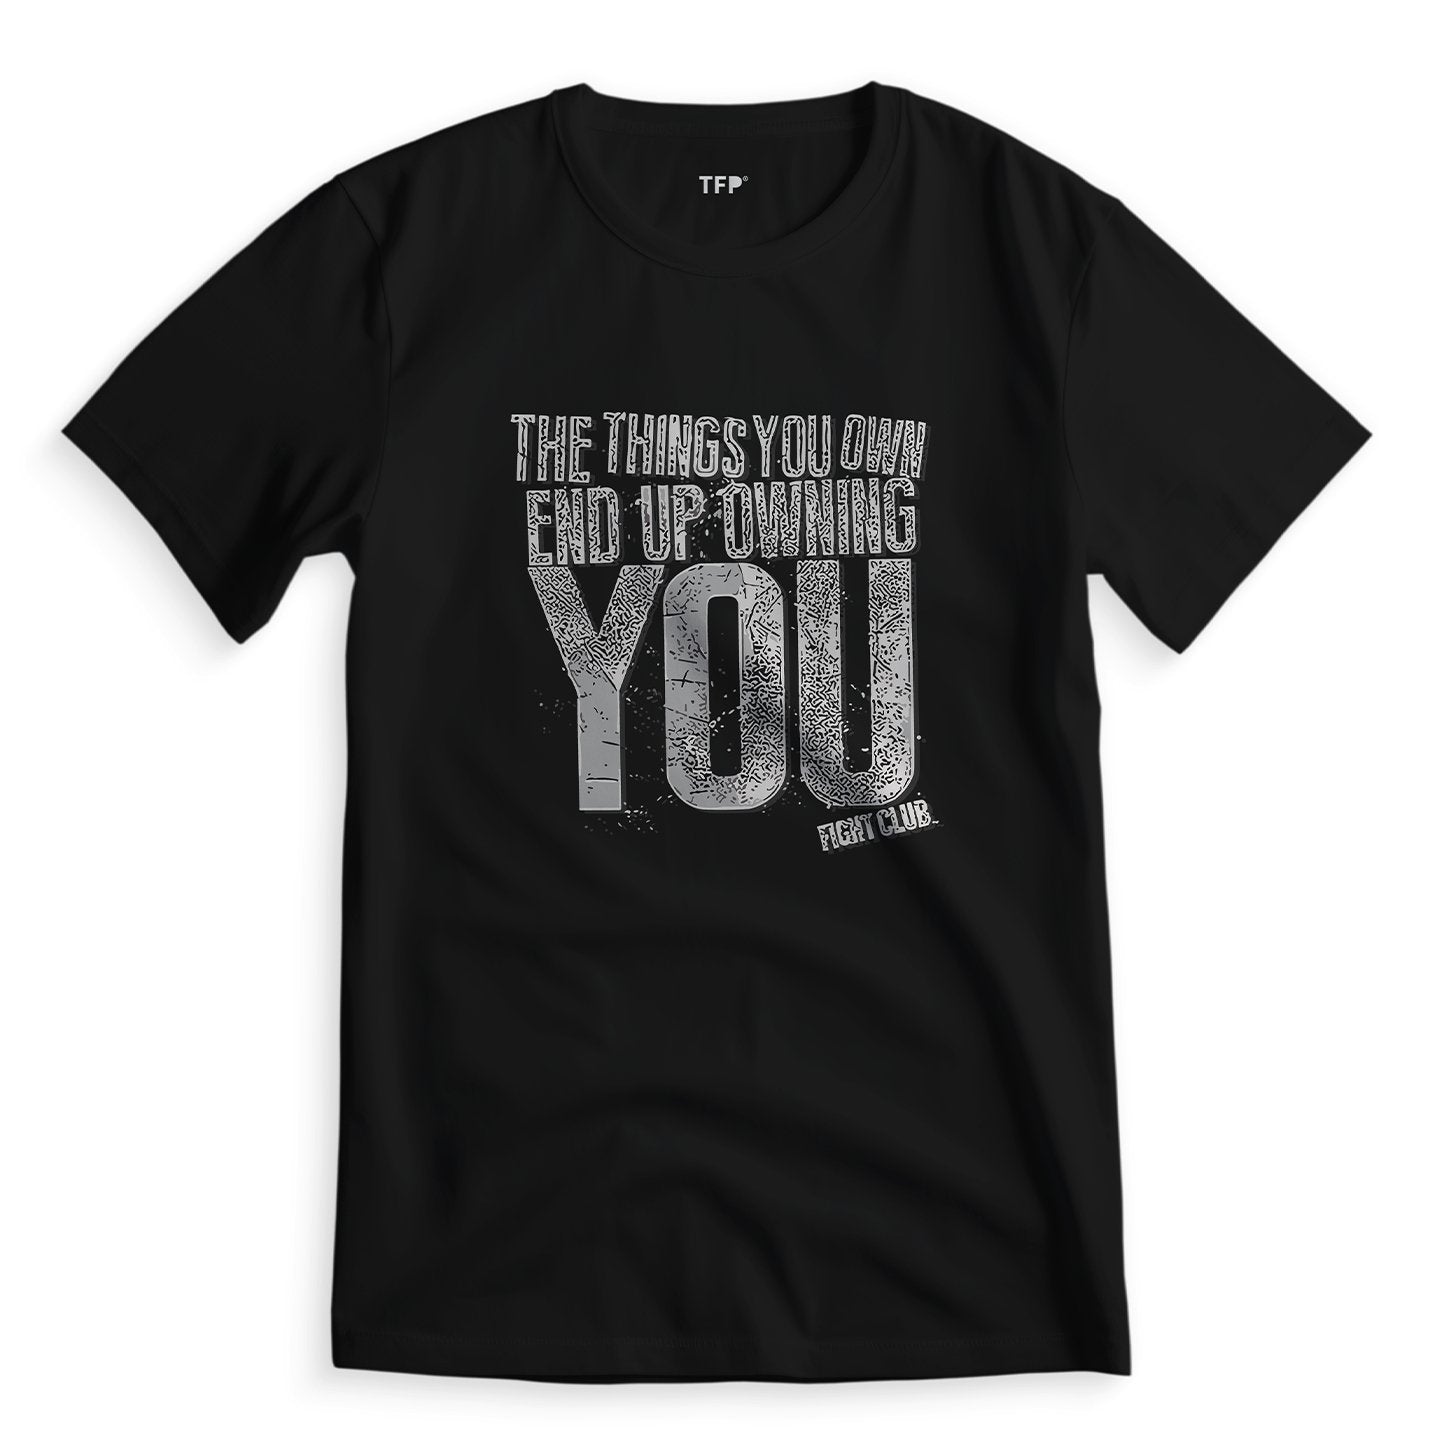 The Things You Own End Up Owning You Fight Club - T-Shirt